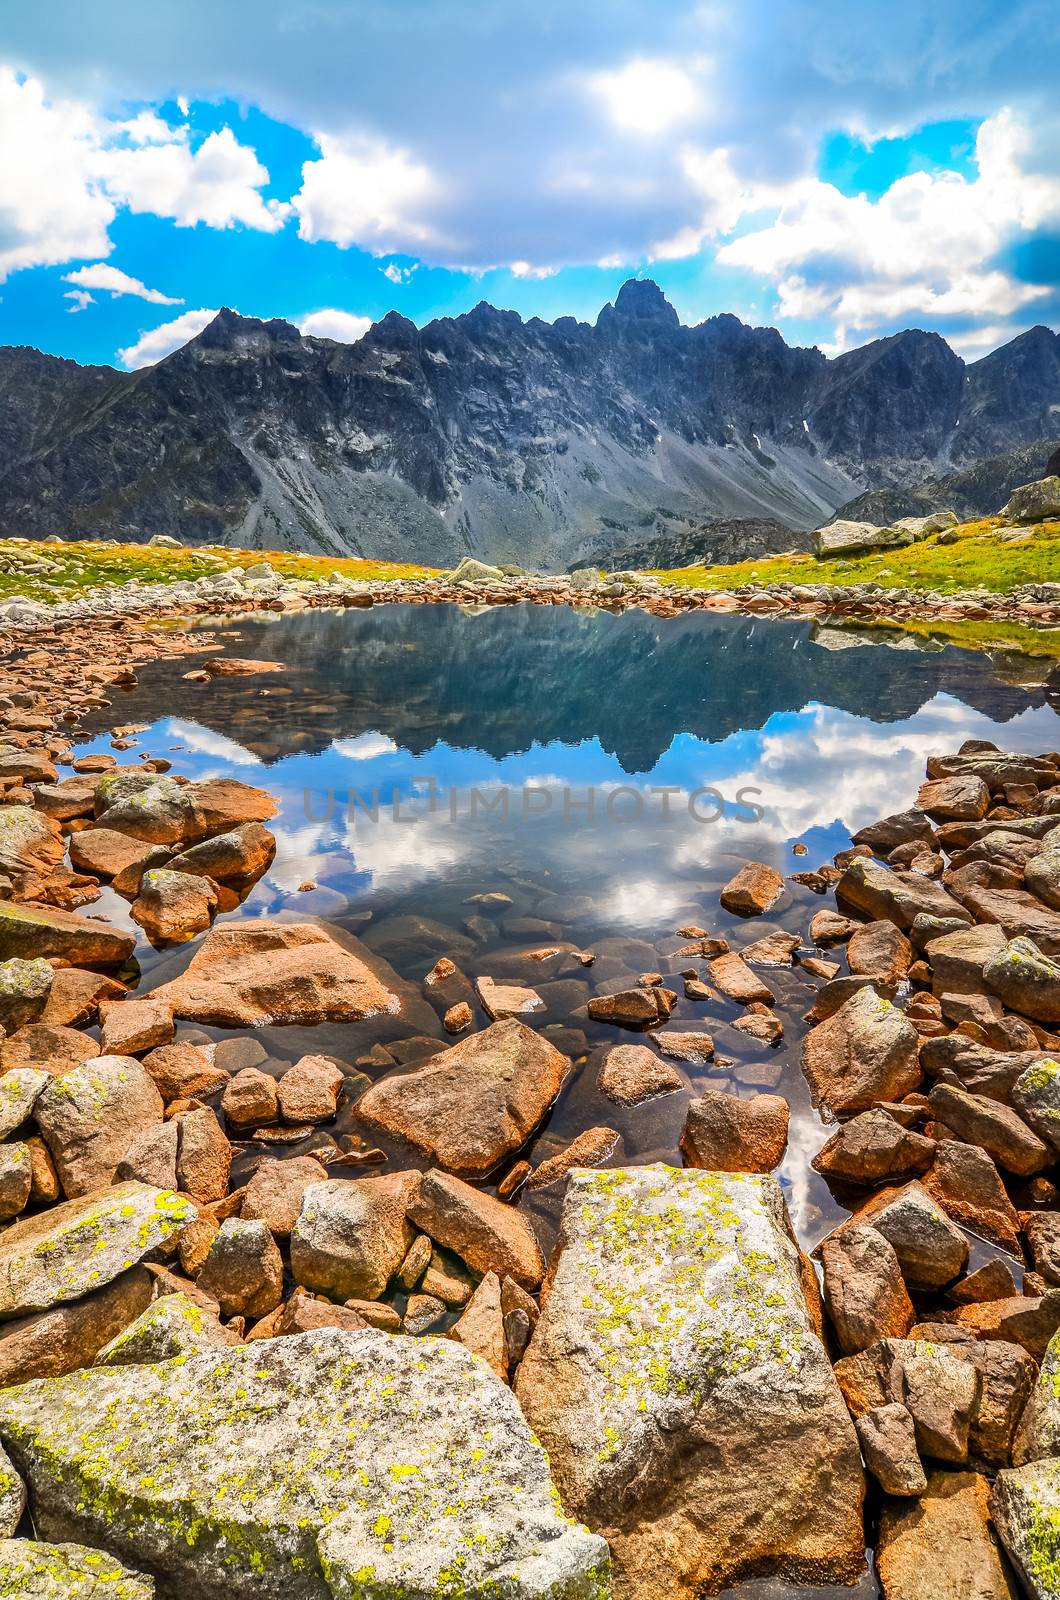 Scenic vertical view of a mountain lake in High Tatras, Slovakia by martinm303